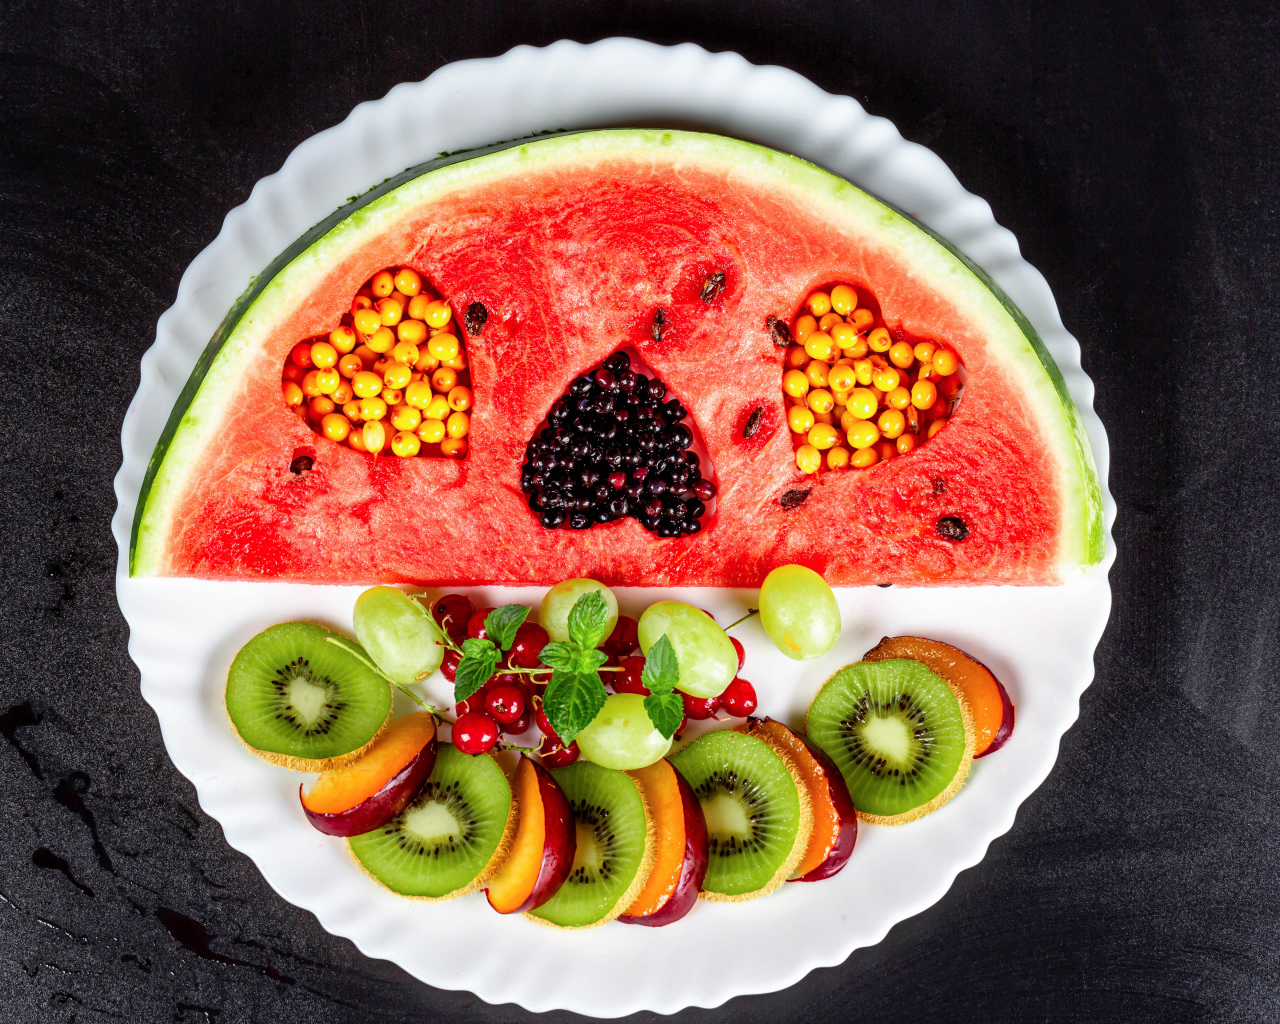 Watermelon on a plate with berries